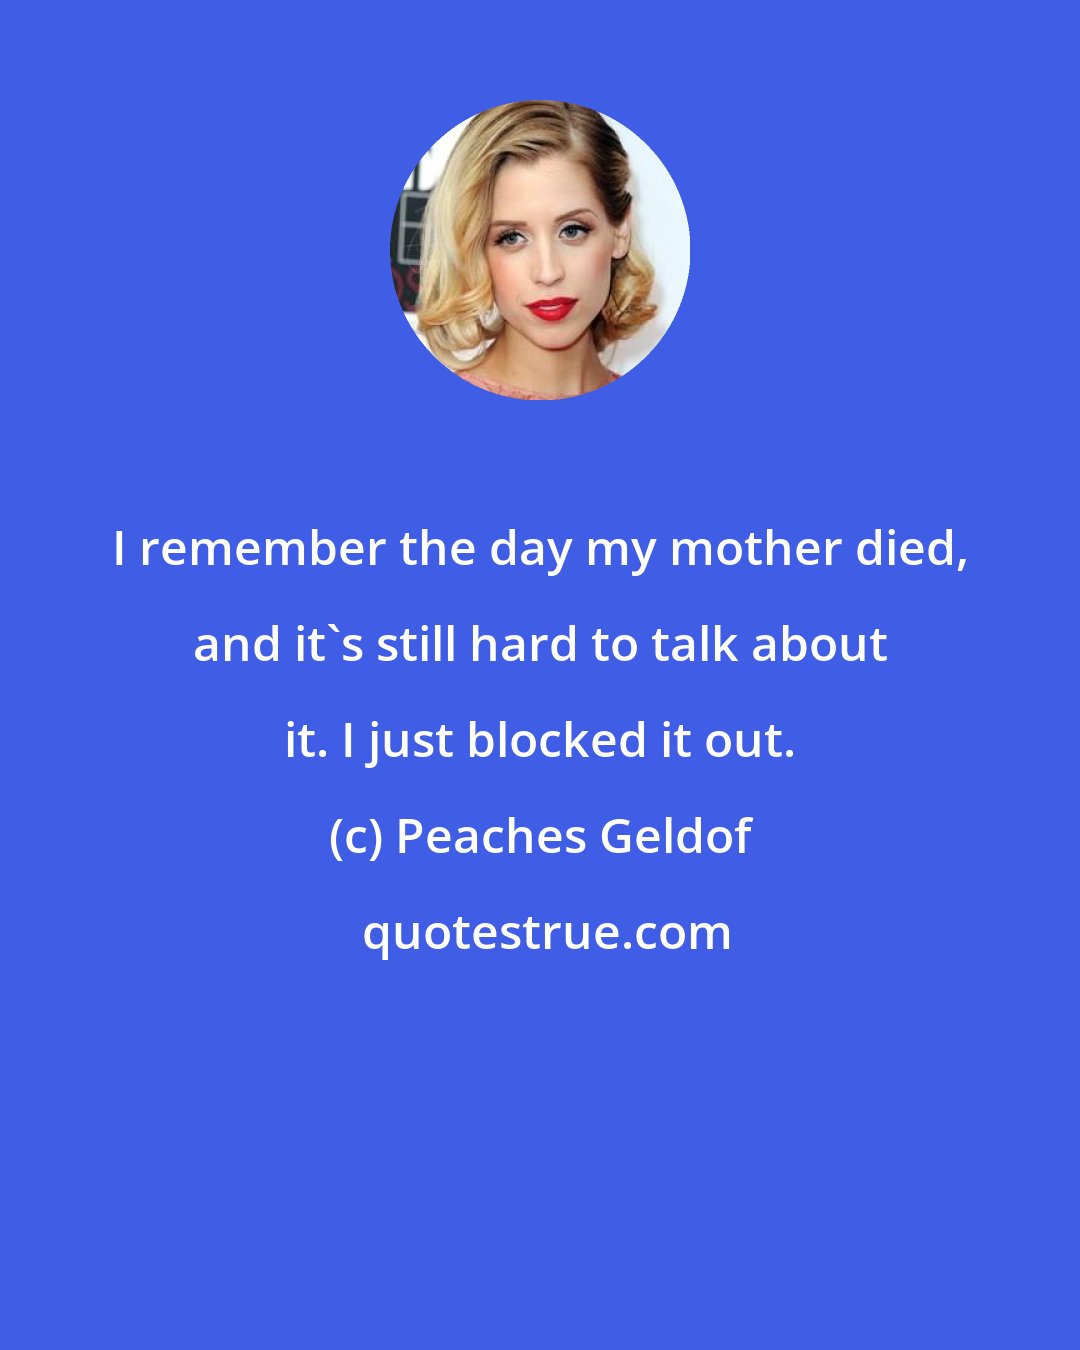 Peaches Geldof: I remember the day my mother died, and it's still hard to talk about it. I just blocked it out.